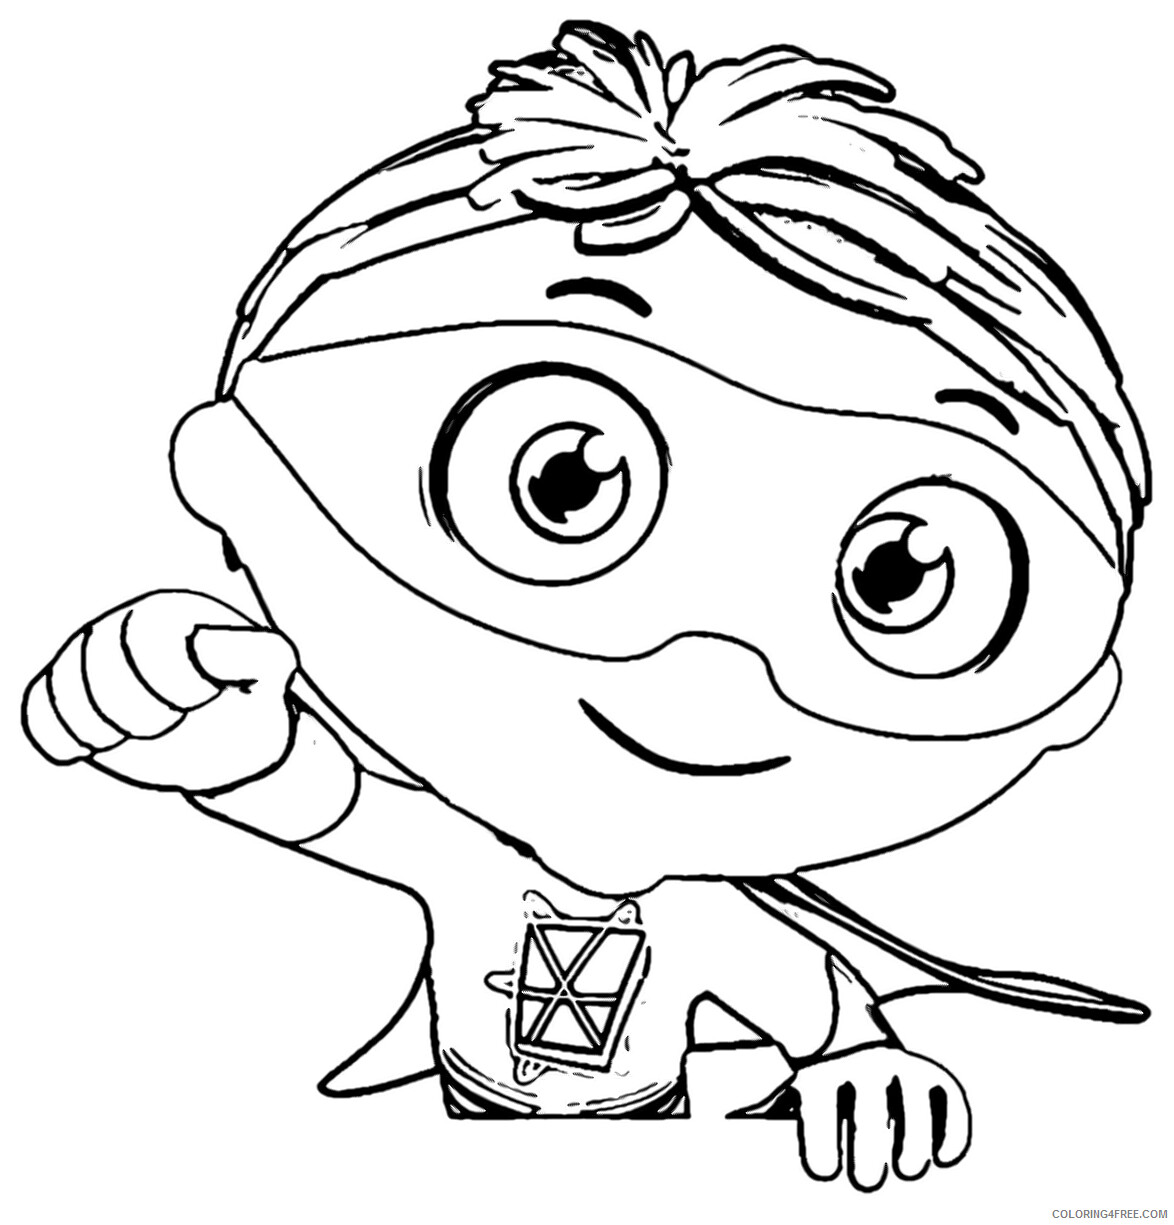 Super Why Coloring Pages TV Film Print Super Why Printable 2020 08307 Coloring4free